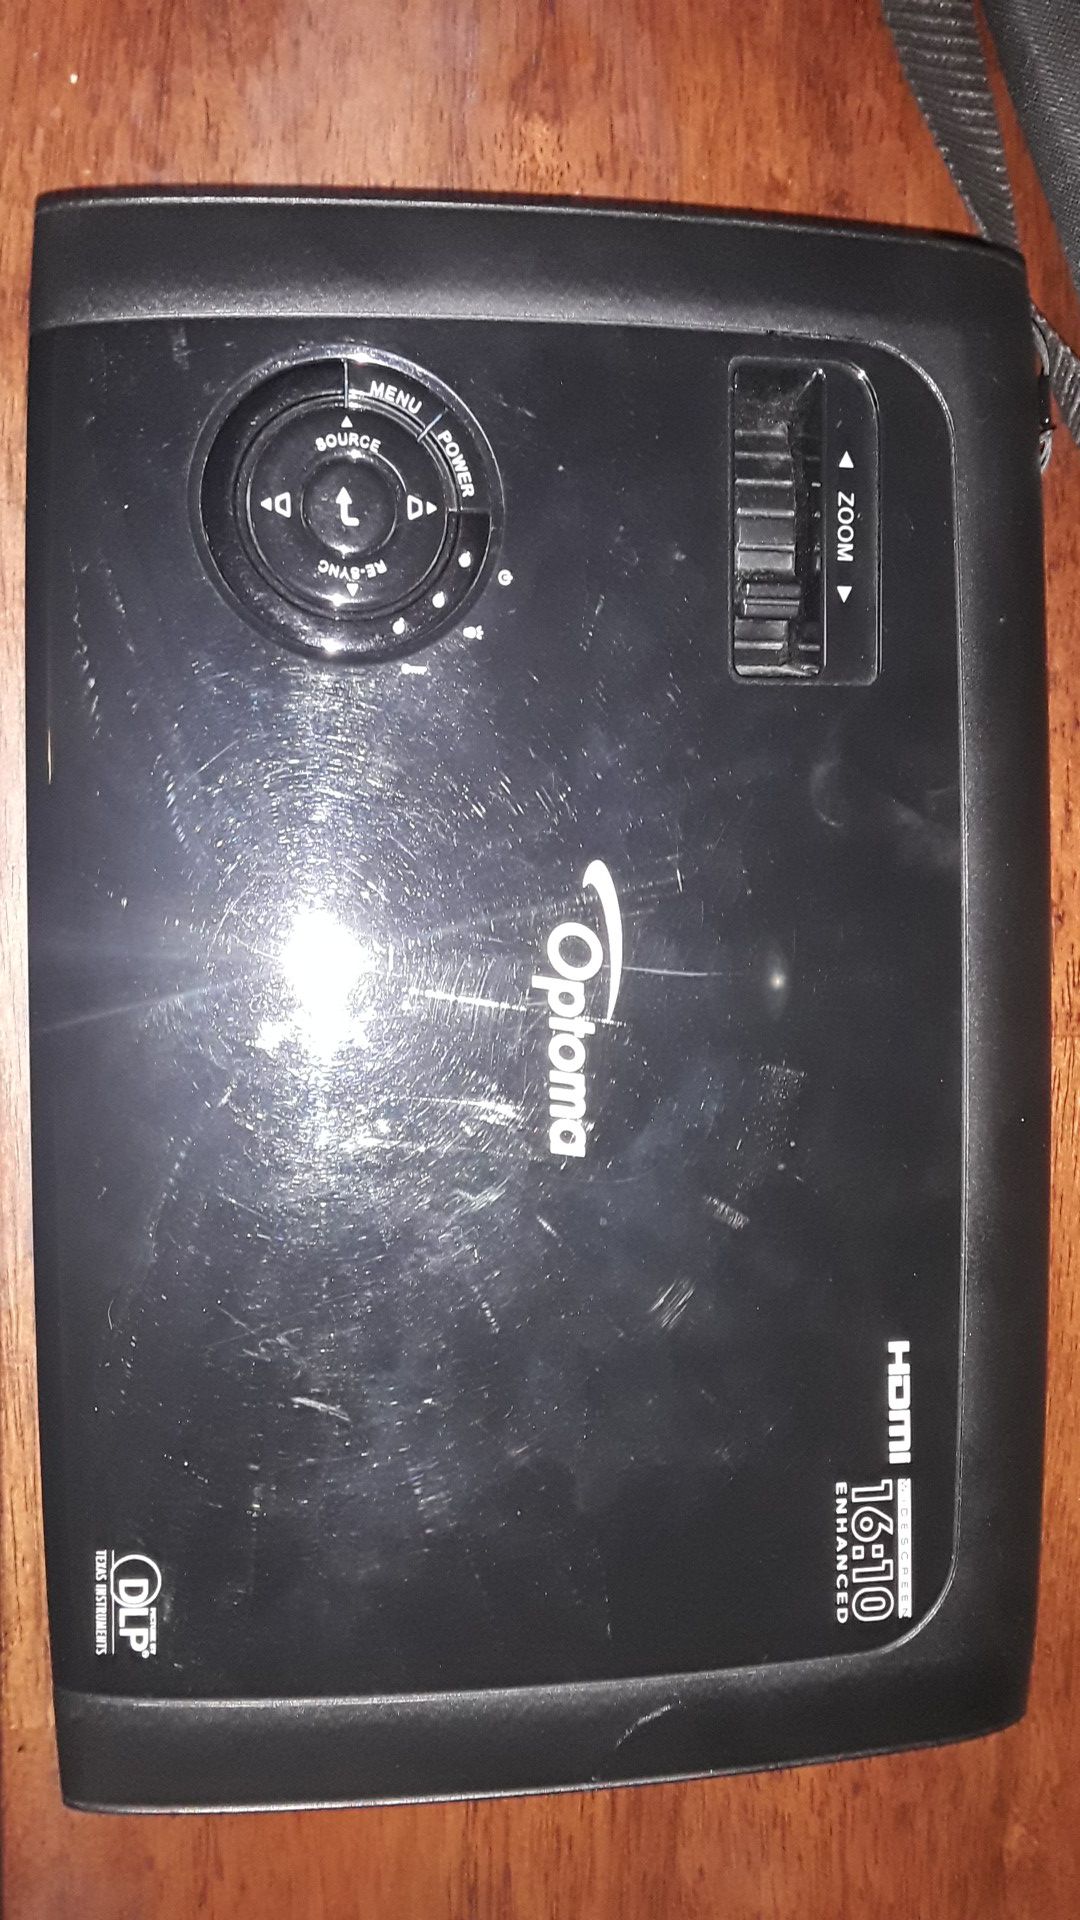 Optoma pro350w projector